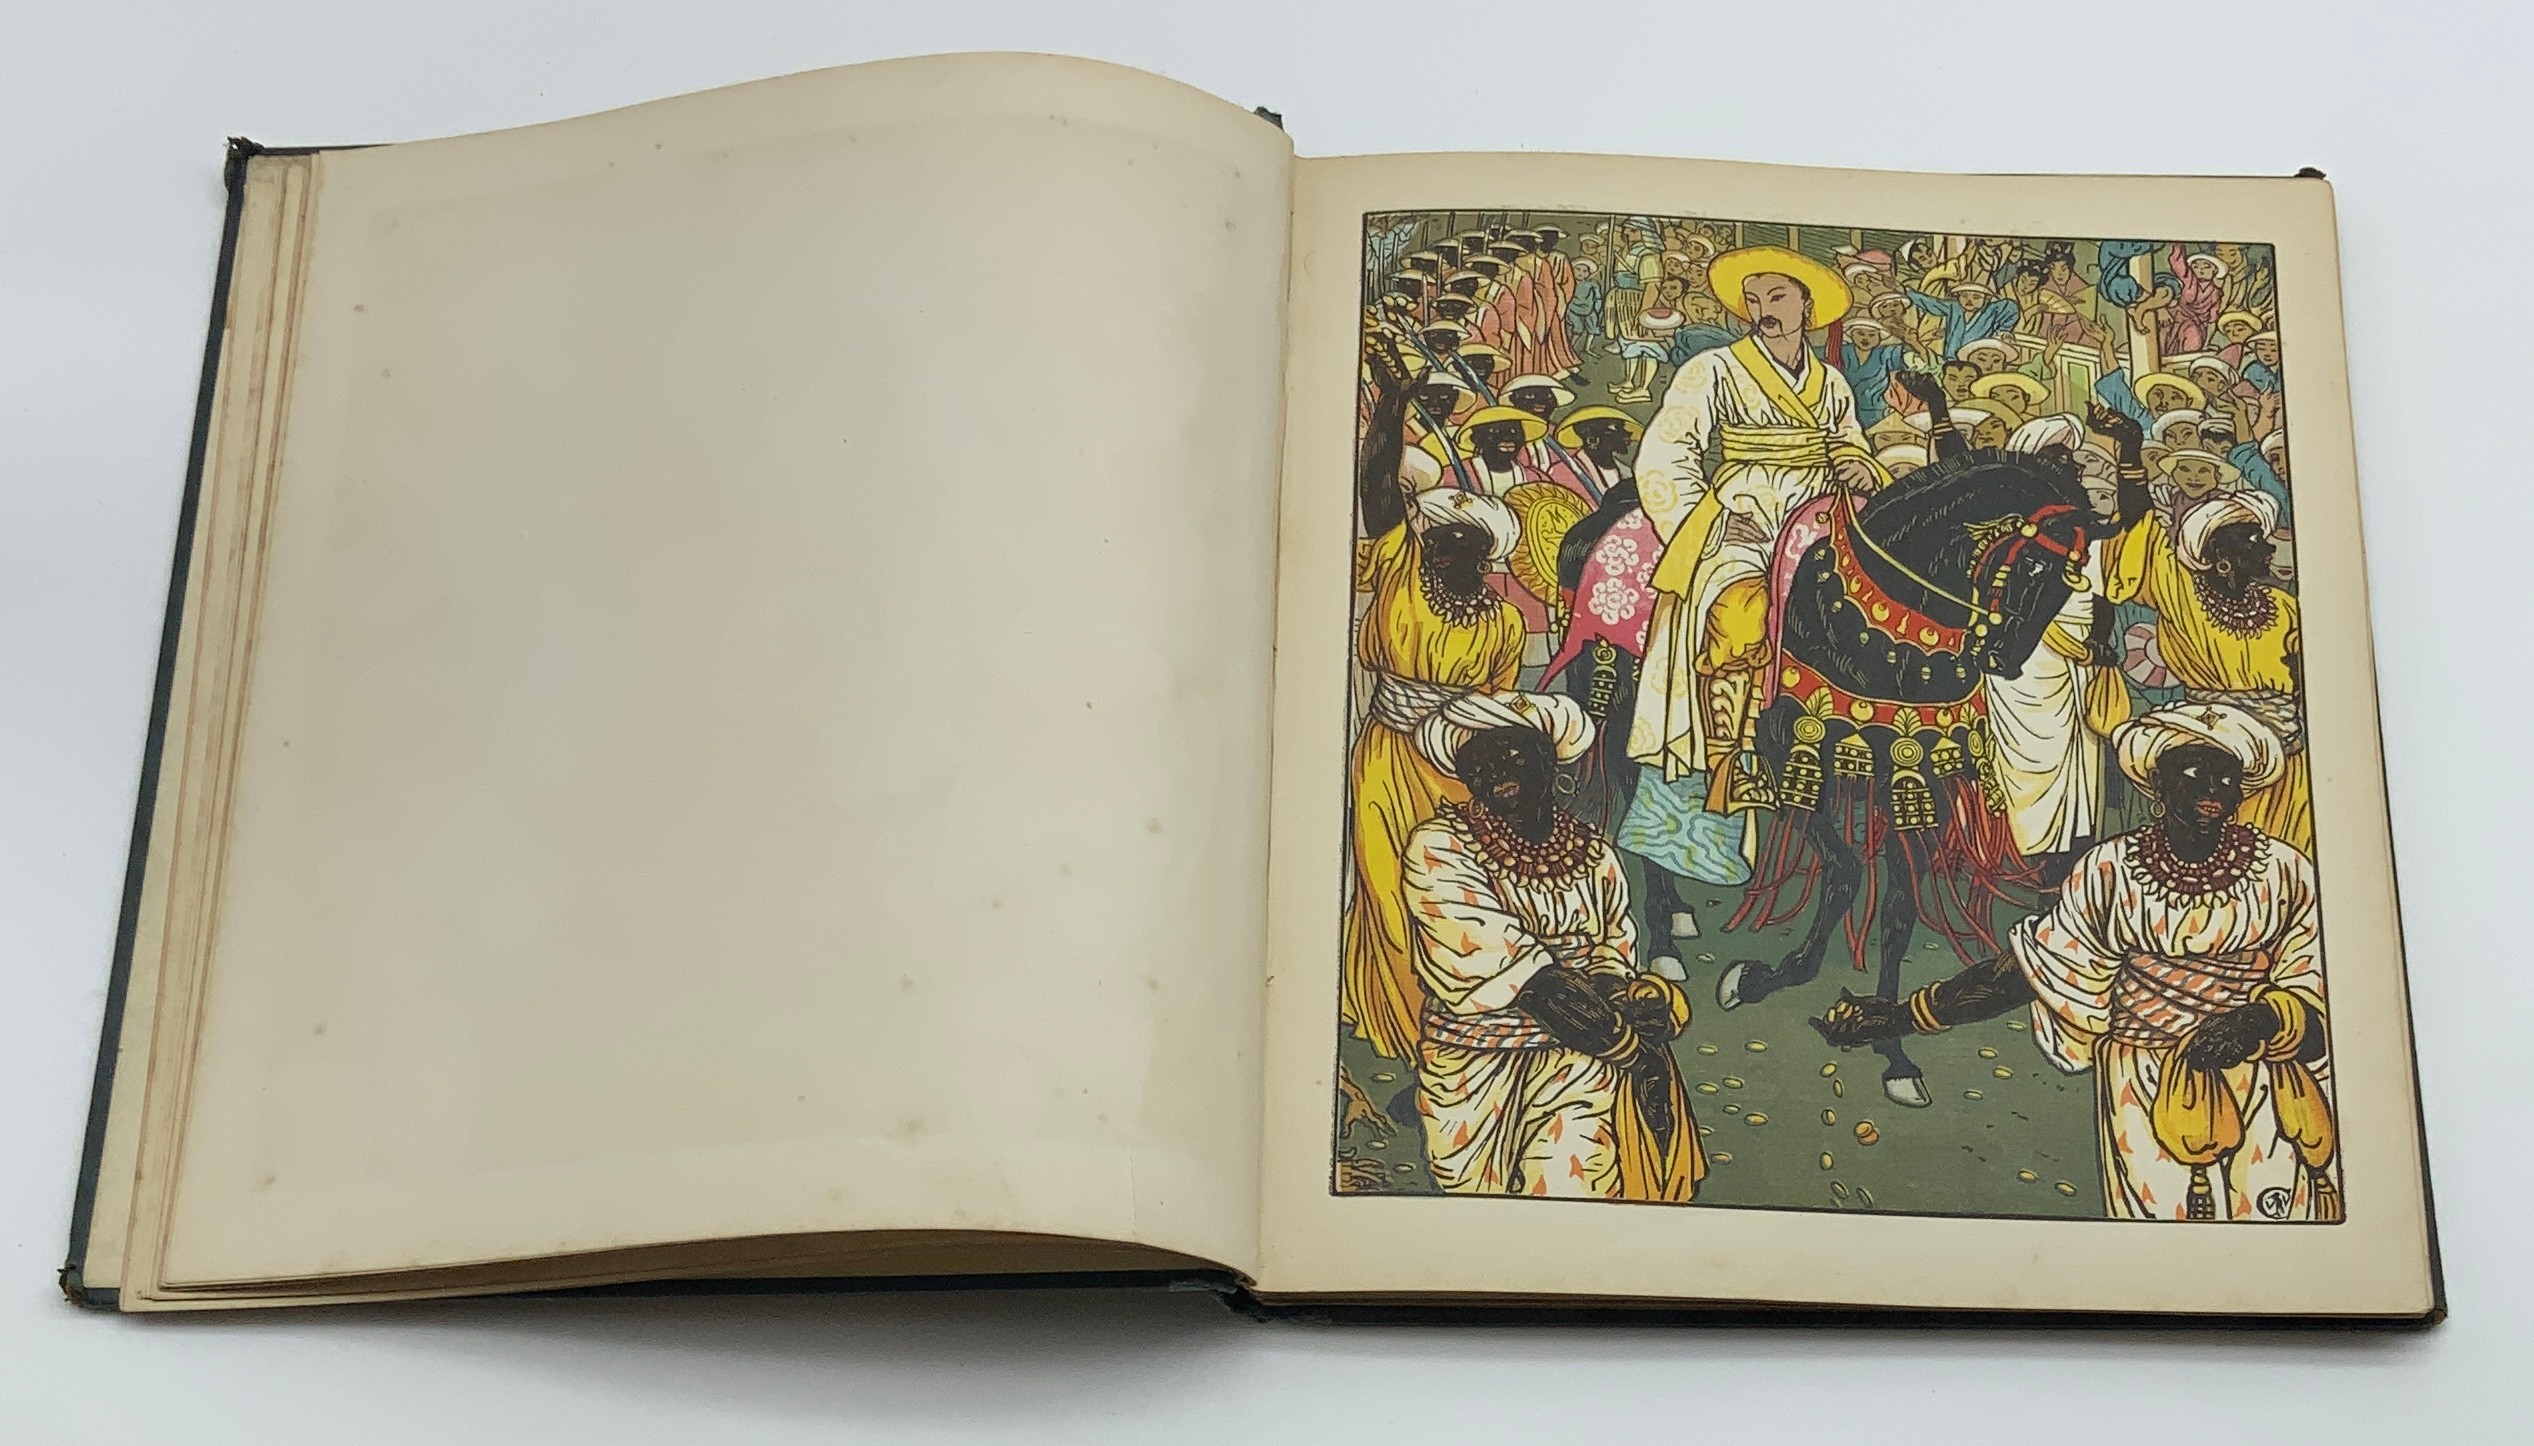 ALADDIN'S PICTURE BOOK - AS FOUND - Image 4 of 6